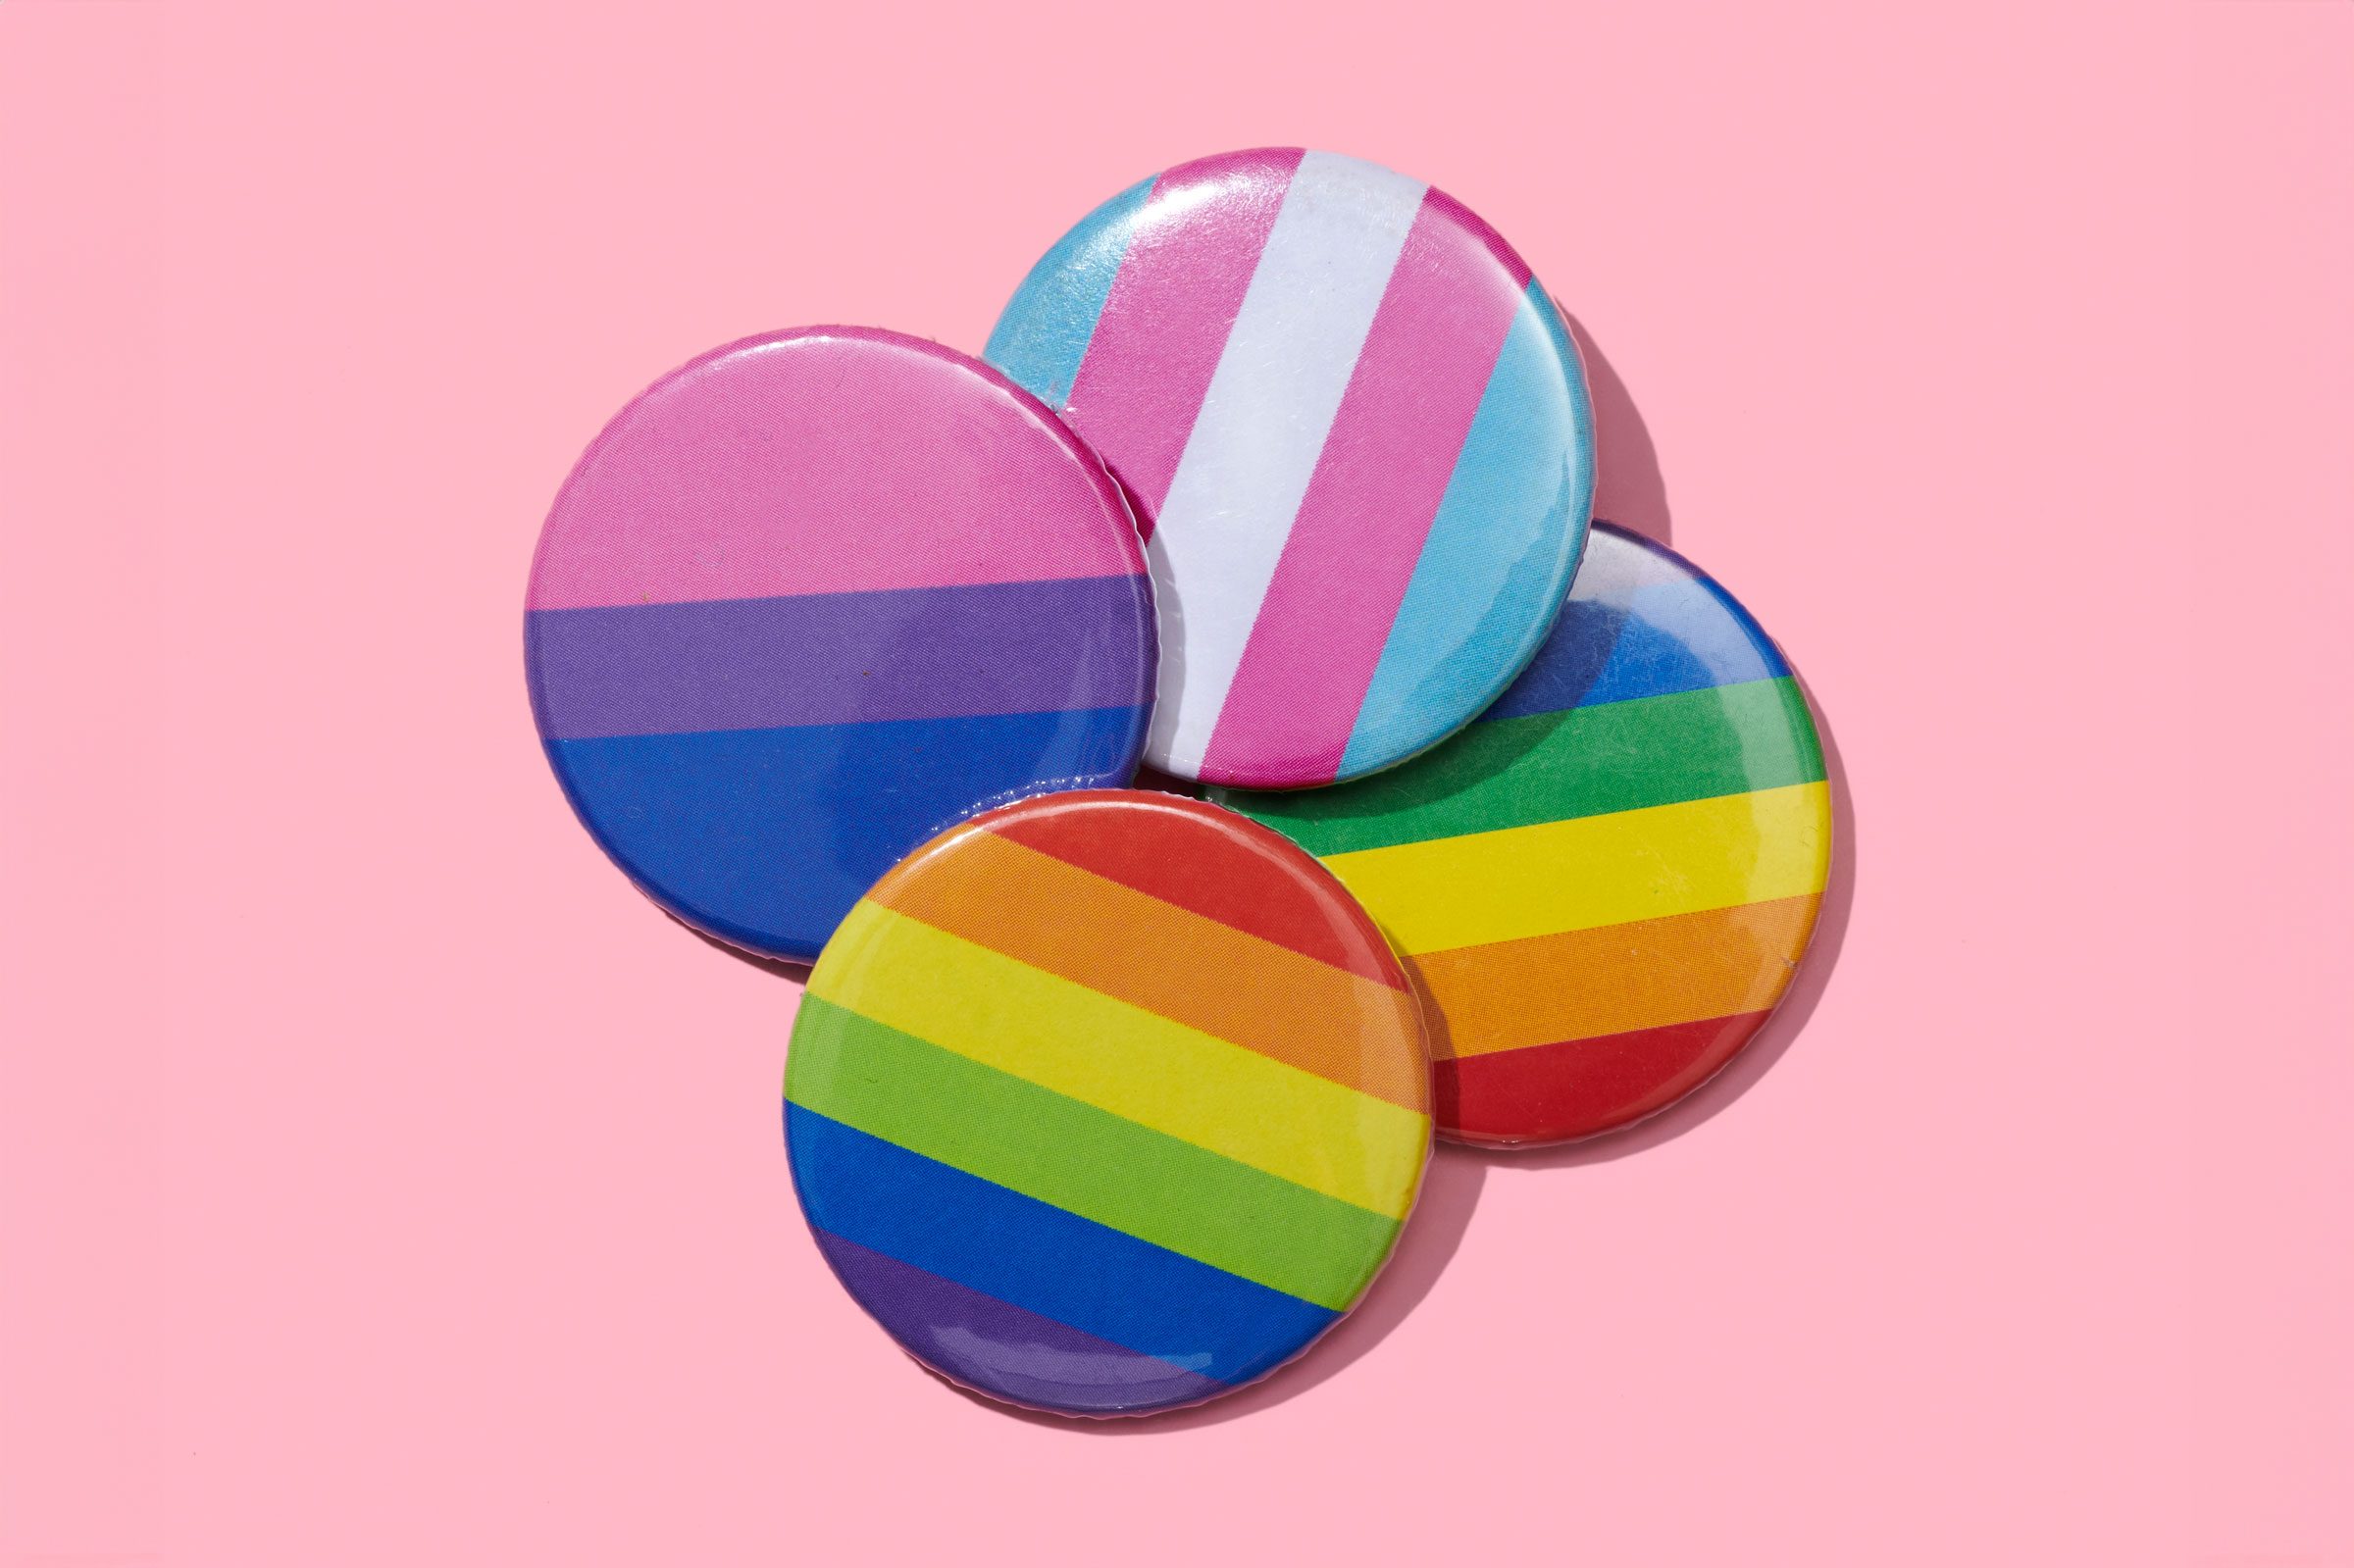  LGBTIQ flags flag patterns on pins on a pink background